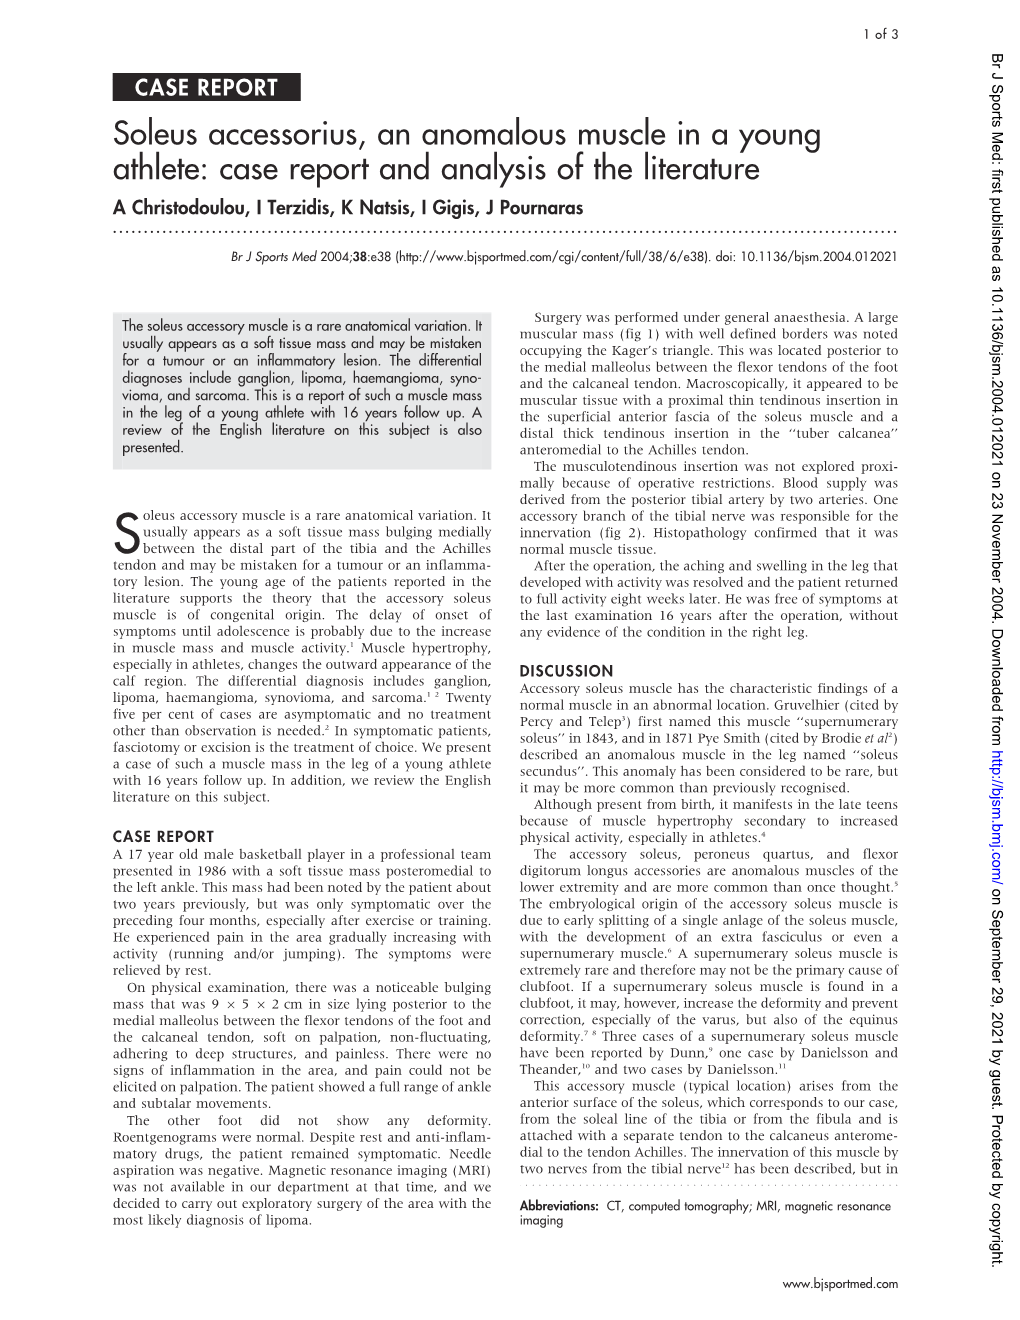 Soleus Accessorius, an Anomalous Muscle in a Young Athlete: Case Report and Analysis of the Literature